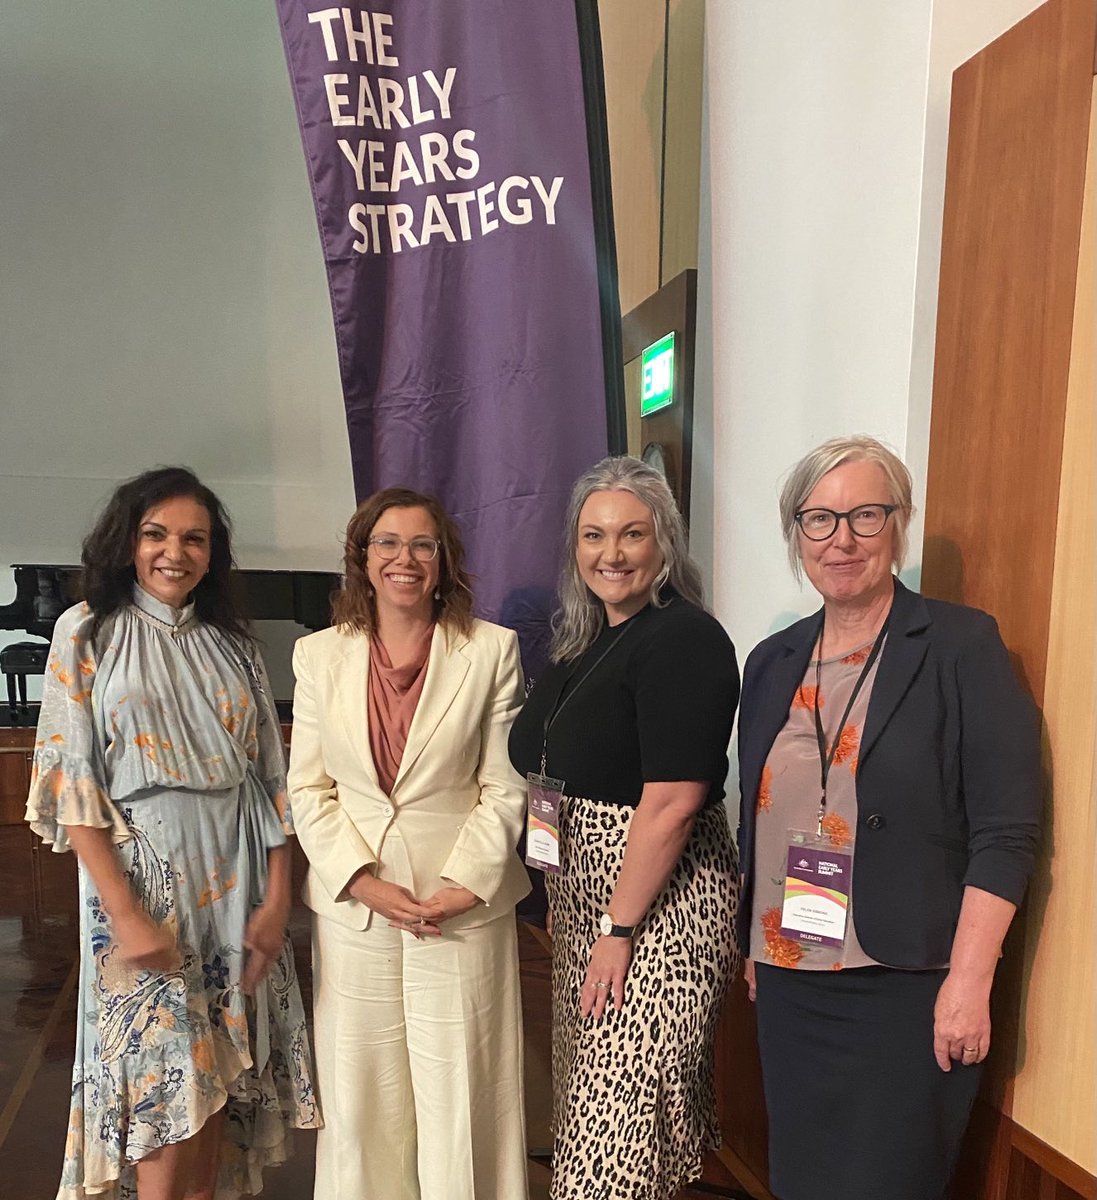 Great convos today at the Early Years Summit, with educator Chantelle Gurr advocating for reform. A well paid and respected workforce is central to an ambitious agenda for children. ⁦@BigStepsUWU⁩ ⁦@UnitedWorkersOz⁩ #ozearlyed ⁦@AmandaRishworth⁩  Dr Anne Aly.